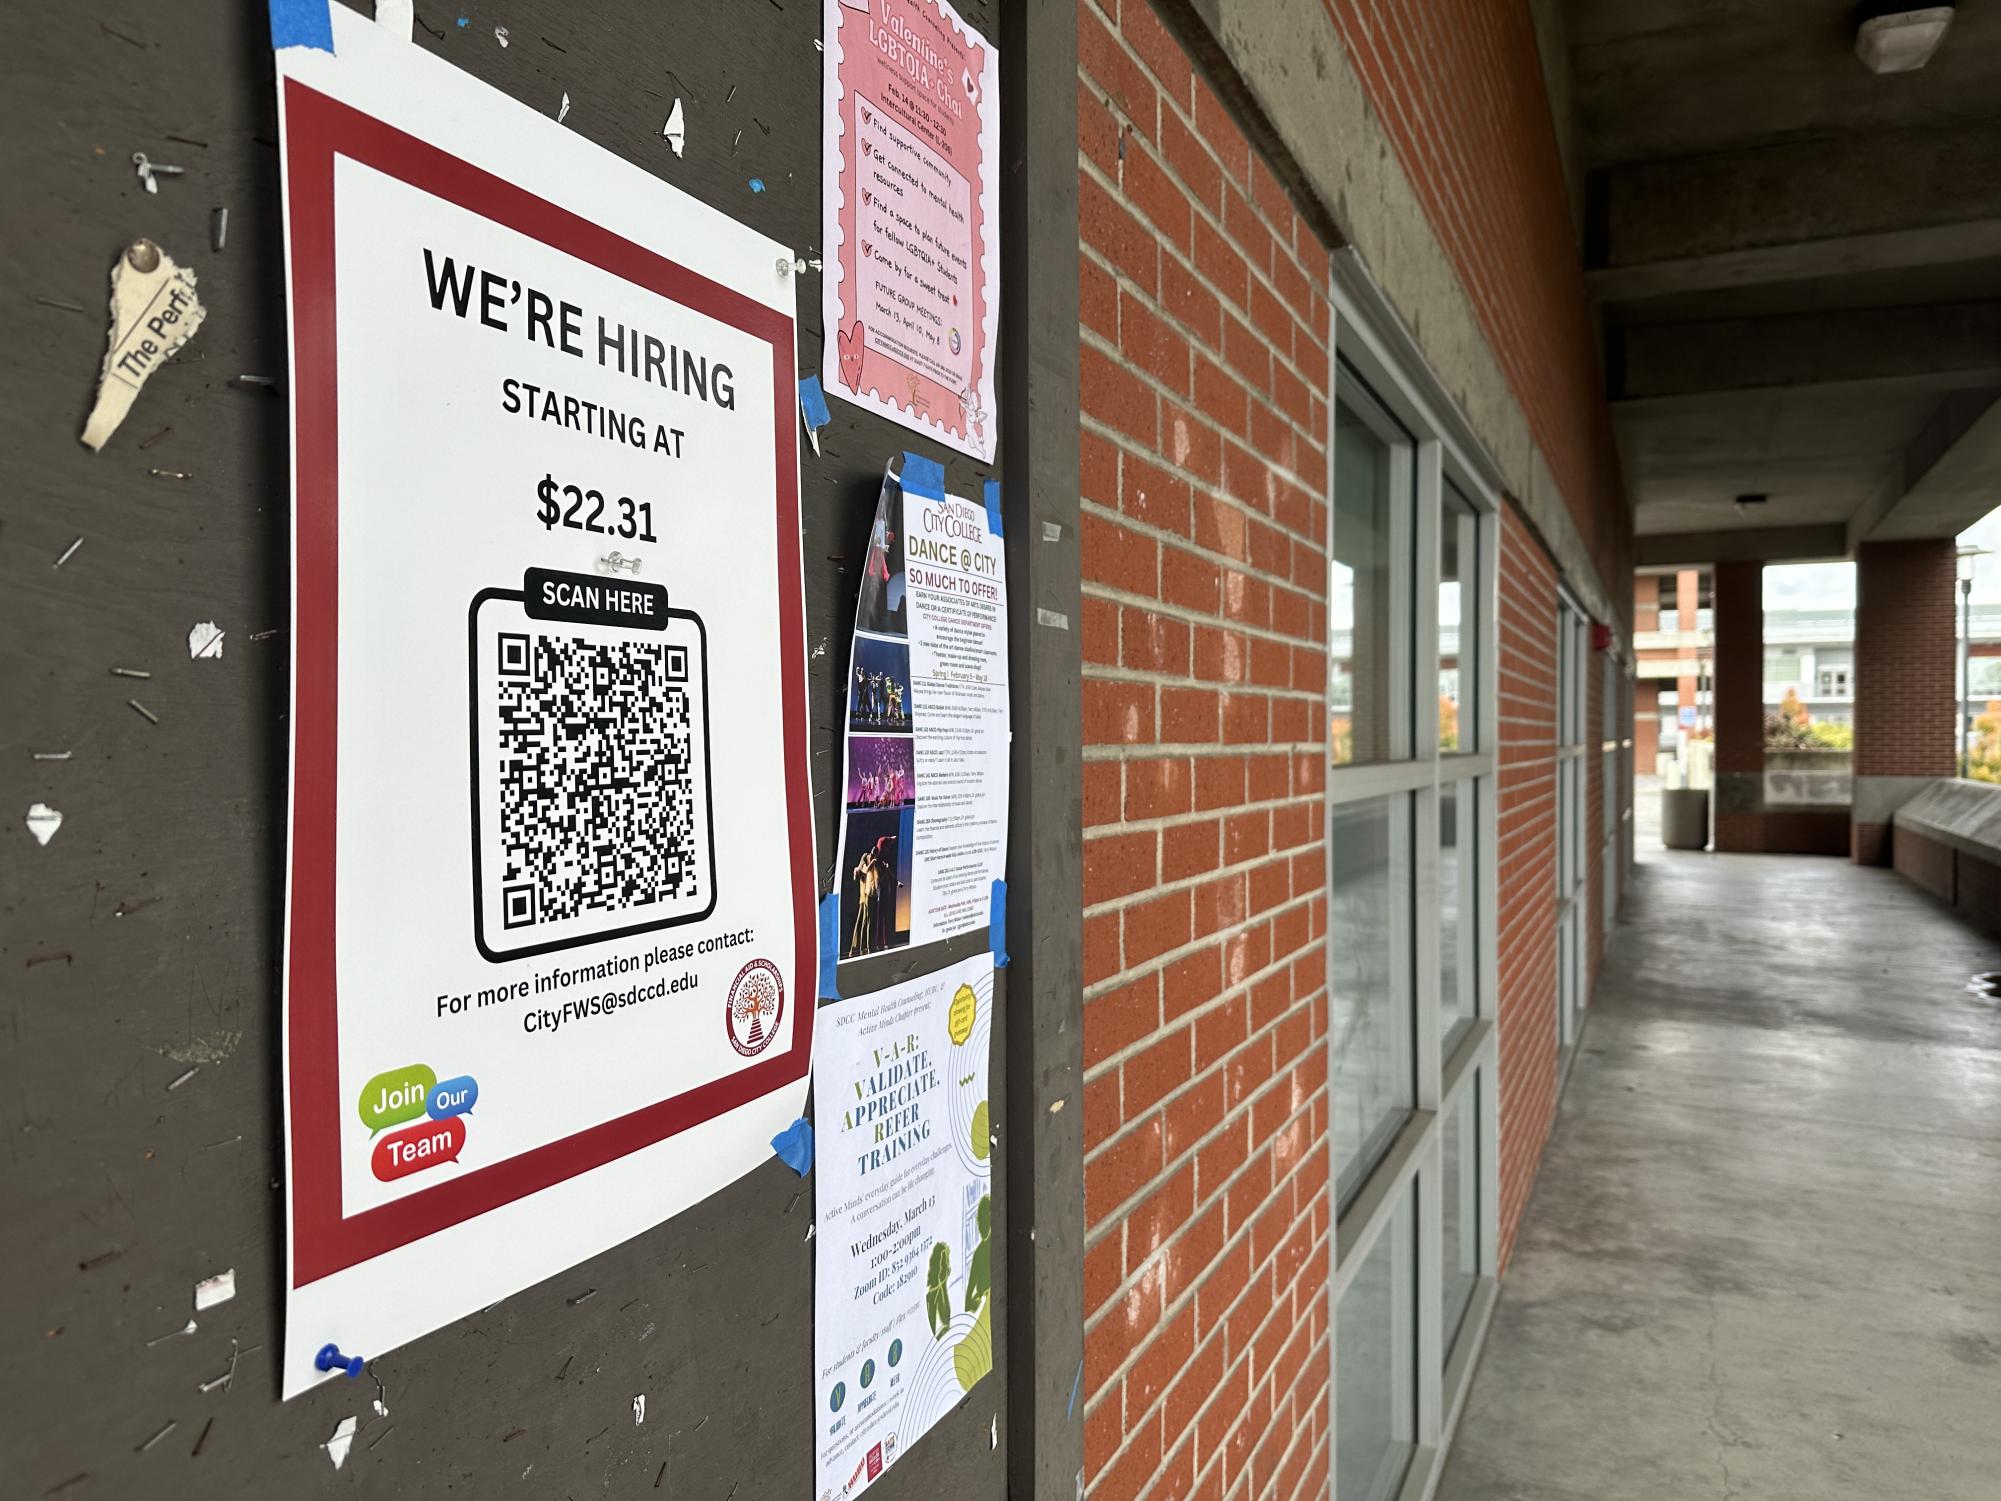 Hiring signs posted around City College campus advertising the new starting pay for hourly employees. Chancellor Greg Smith hopes increasing the minimum wage at the district will draw more high quality candidates to SDCCD. Photo by Bailey Kohnen/City Times Media